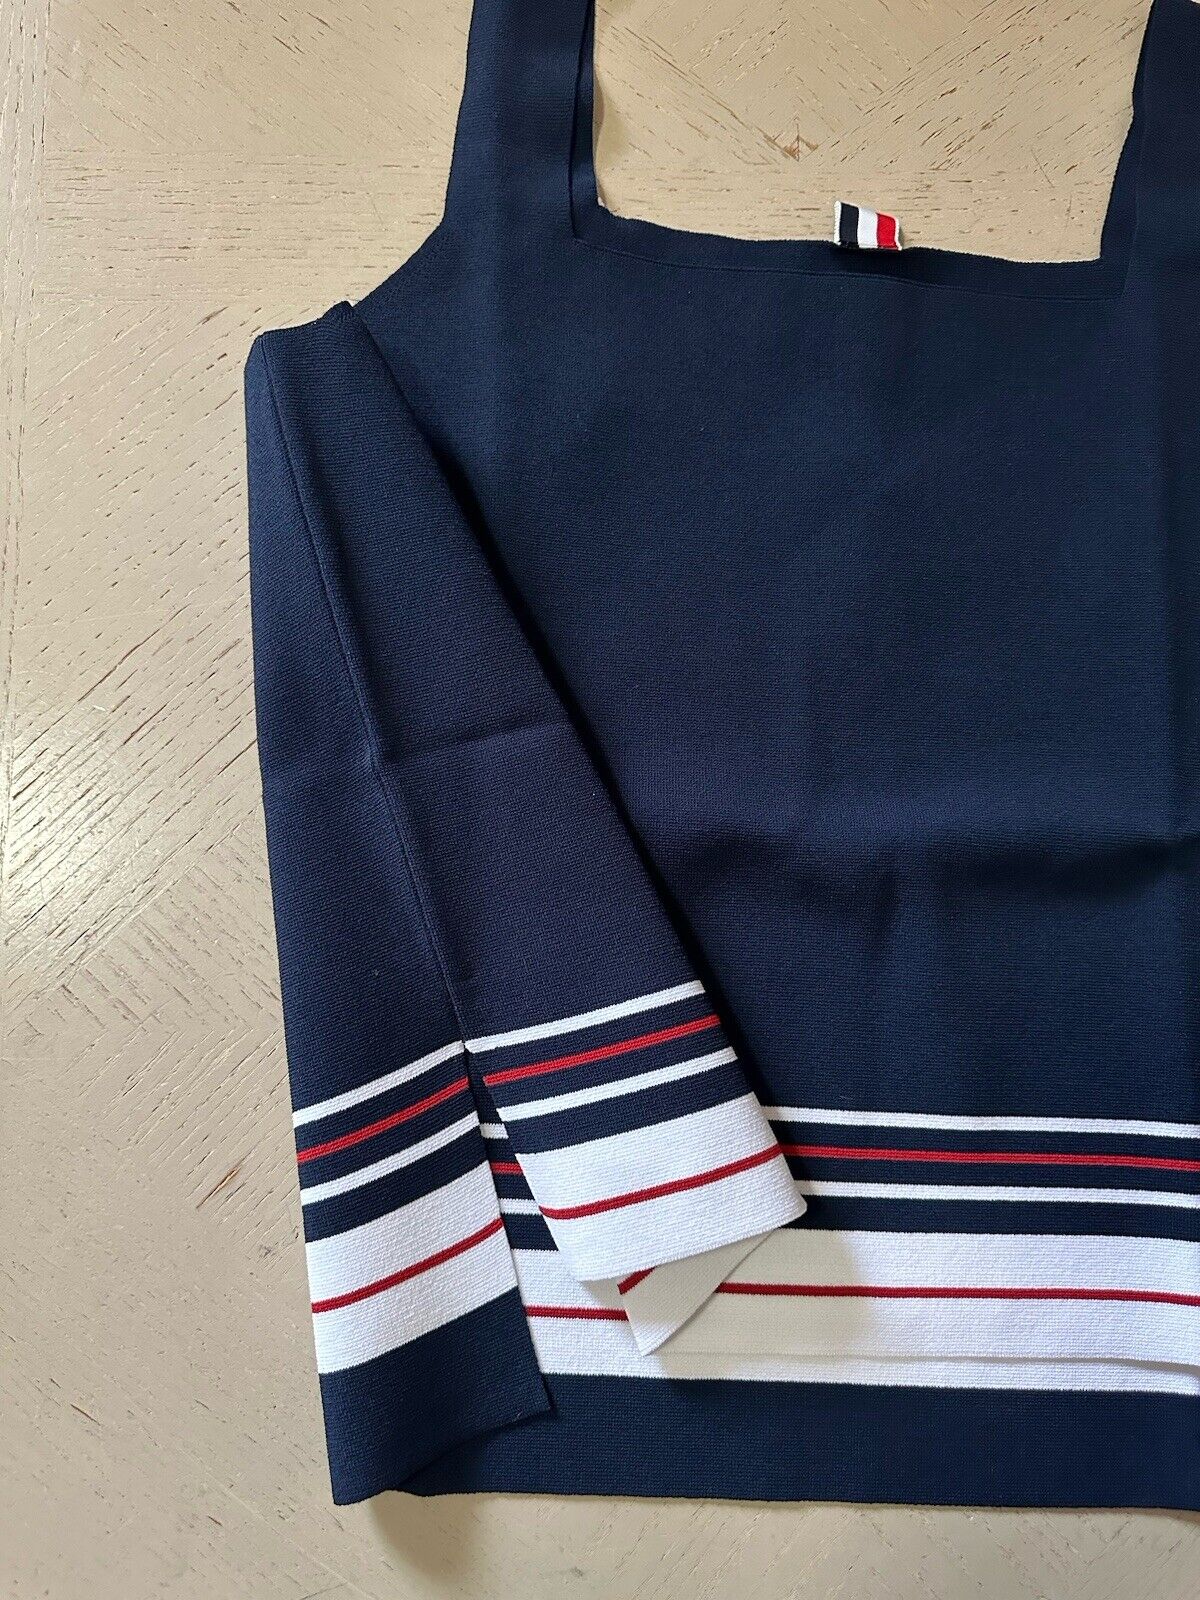 New $590 Thom Brown Squareneck Stripe Knit Navy Top Size 48/12 Italy